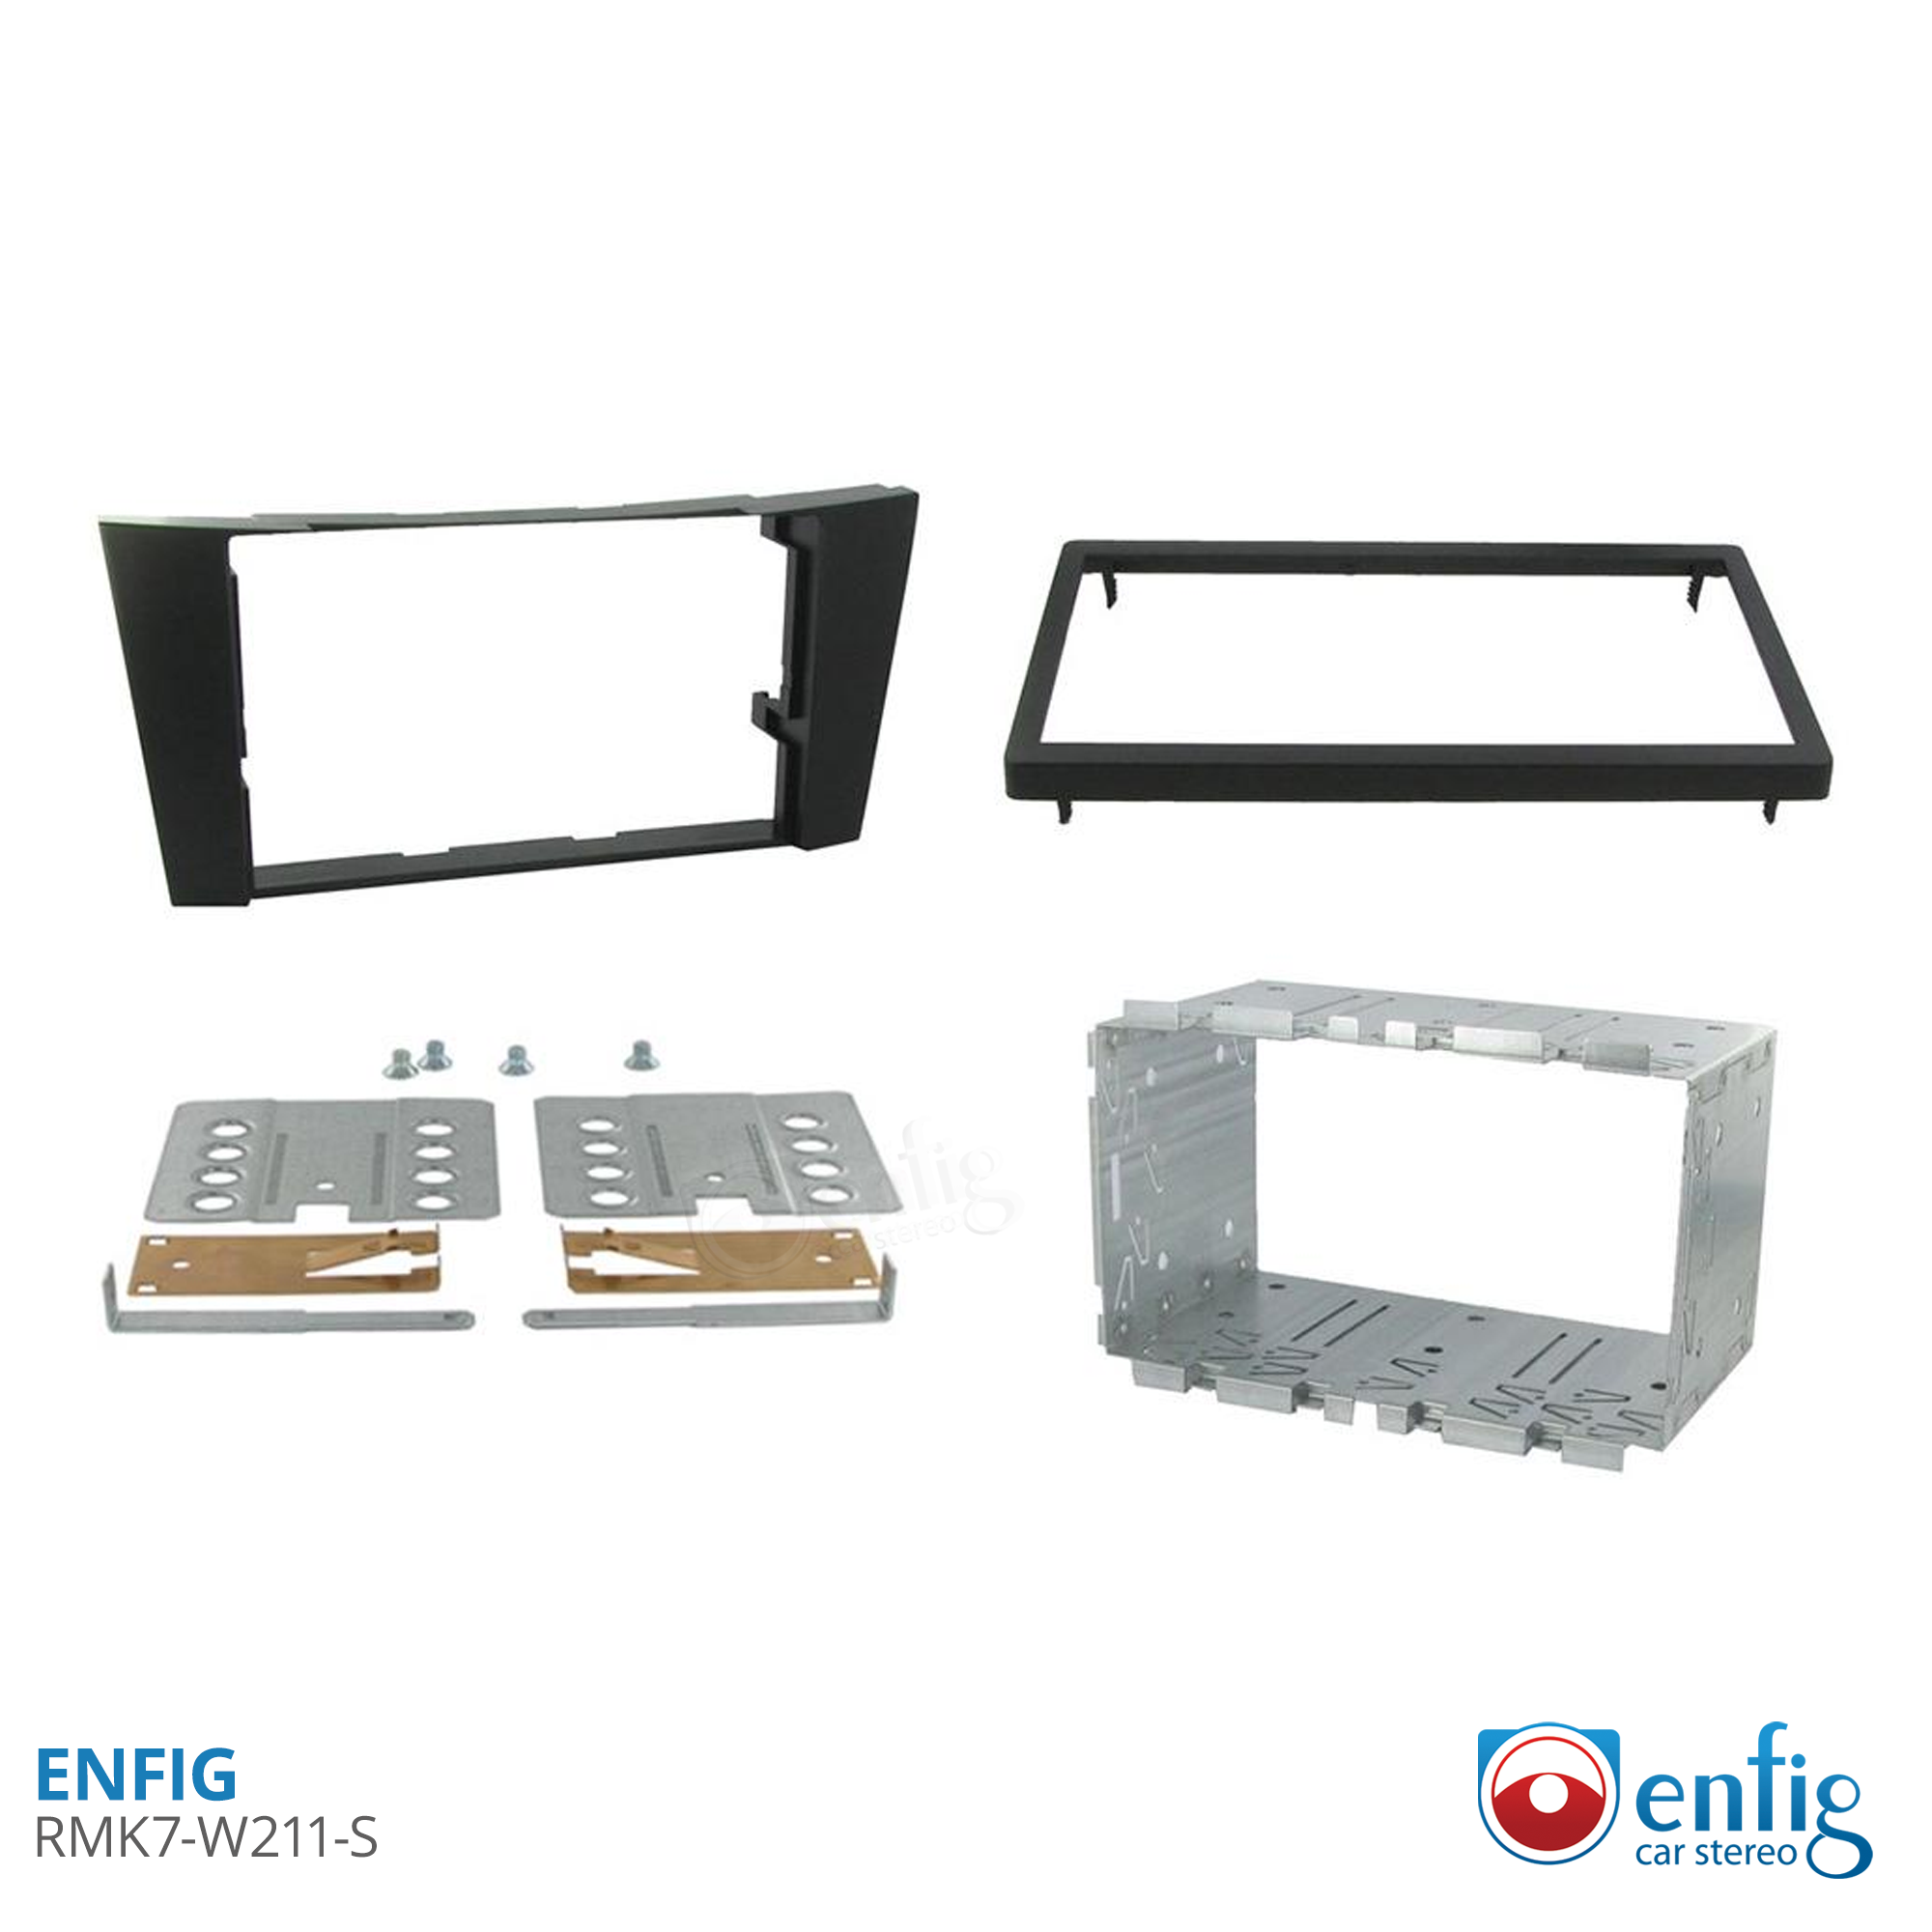 Enfig RMK7-W211 Double Din Radio Mounting Kit for W211 Mercedes Benz –  Enfig Car Stereo